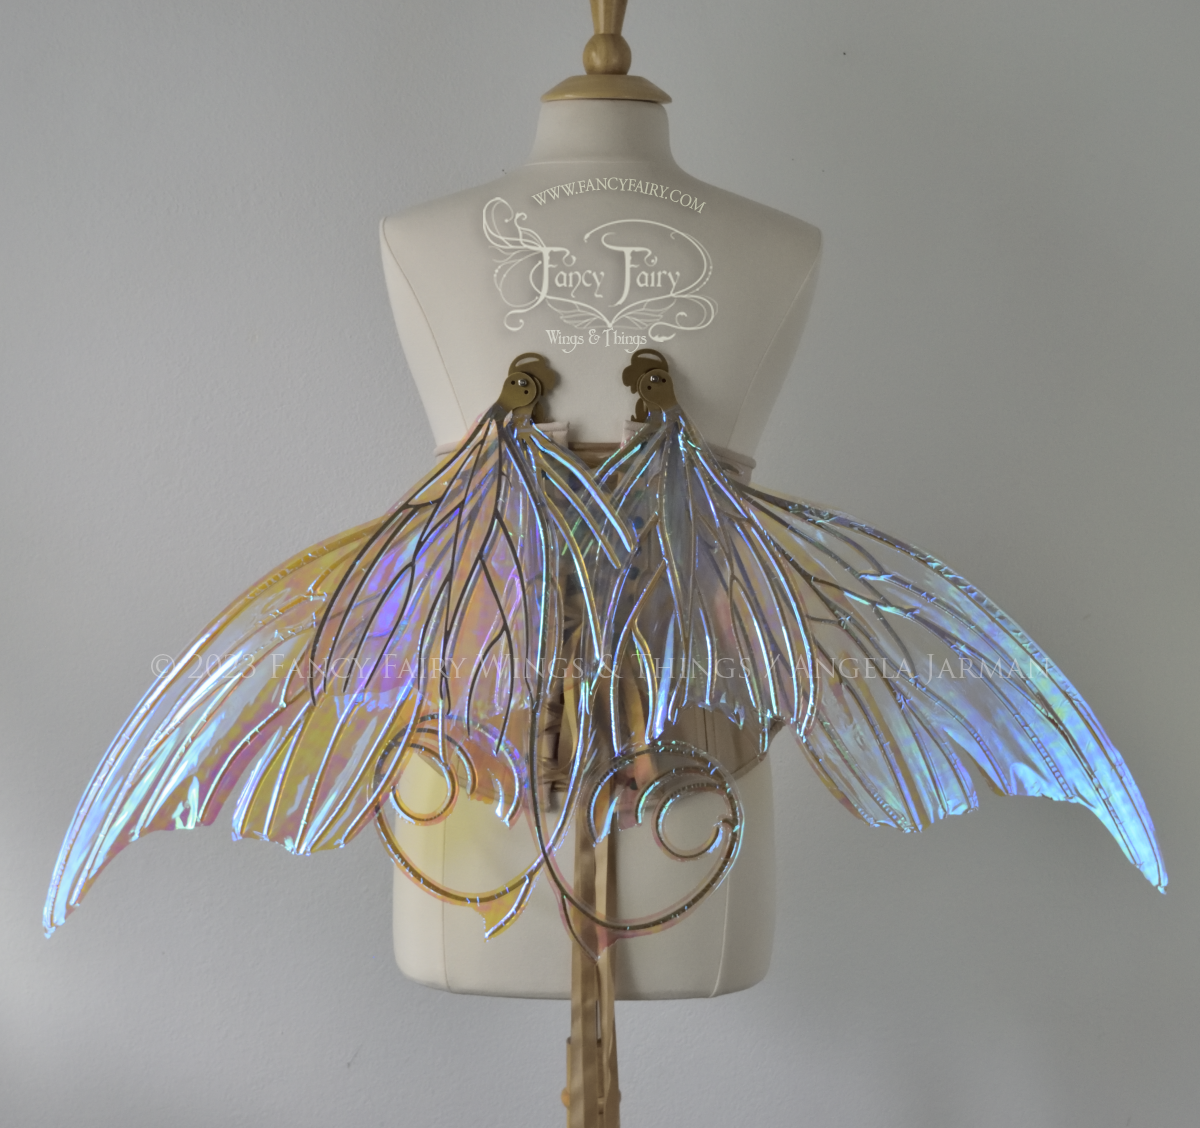 Back 3/4 view of a dress form wearing an underbust corset & large blue iridescent fairy wings with lots of intricate veins, some have 'thorns'. Upper panels curve slightly downwards along top edge with pointy tips, bottom panels have tails, wings in resting position